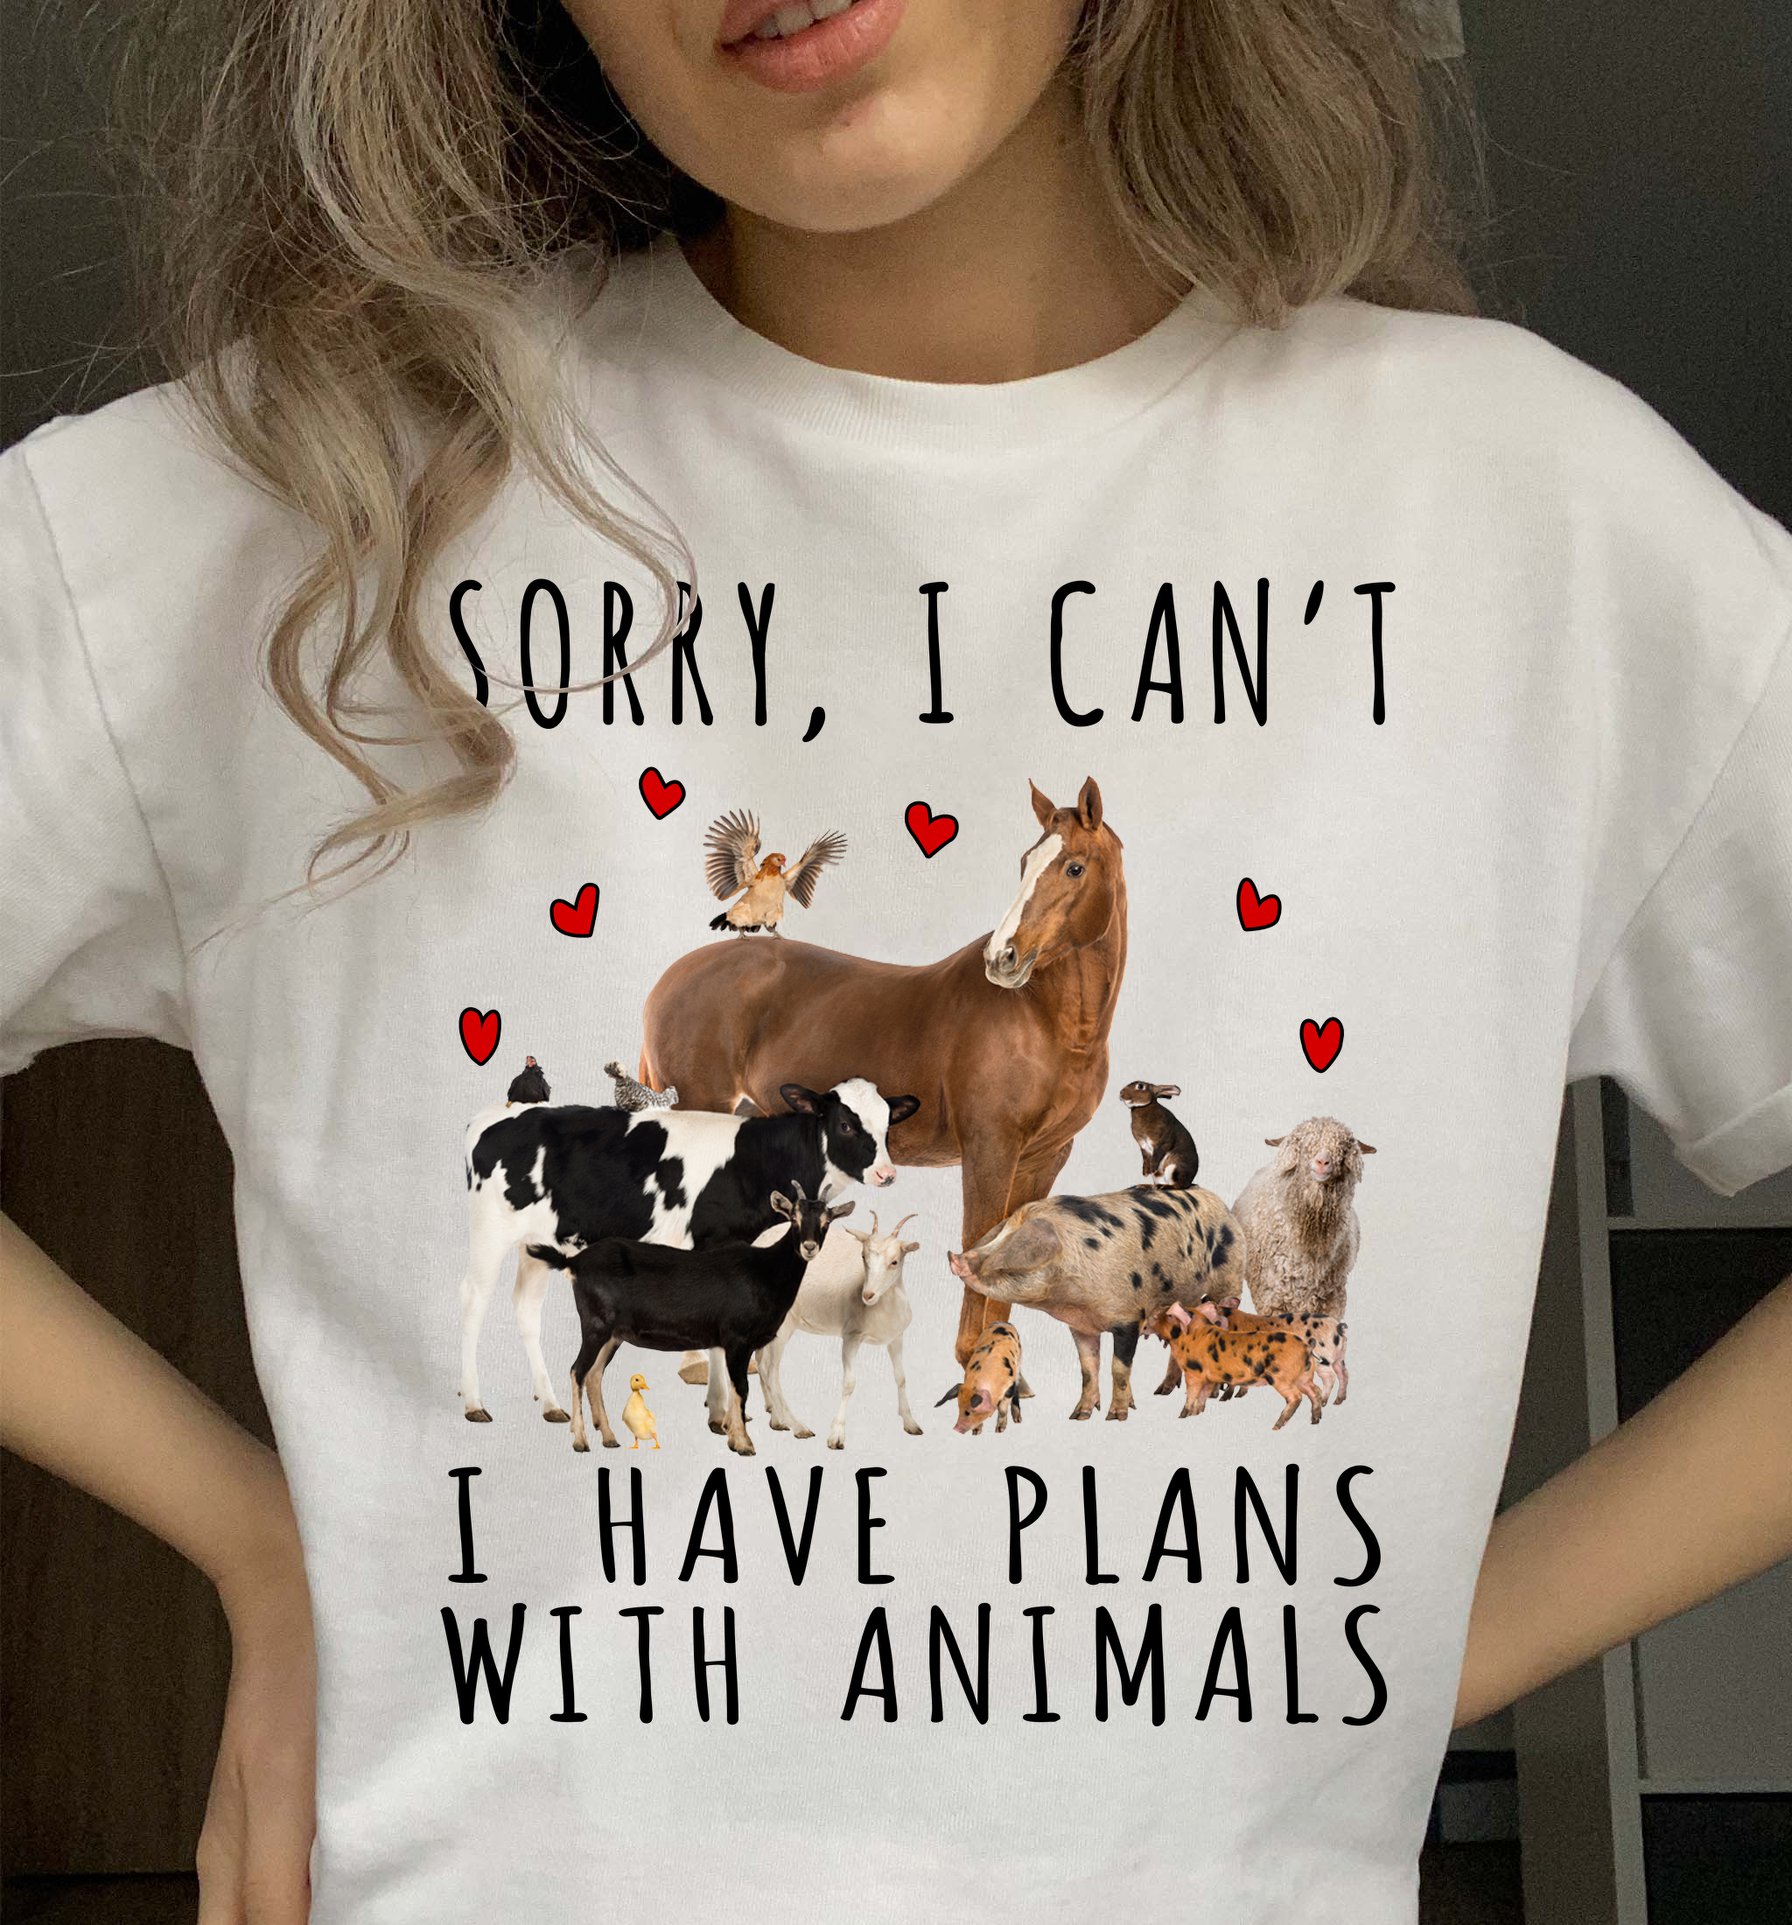 Sorry, I can't I have plans with animals - Animal lover